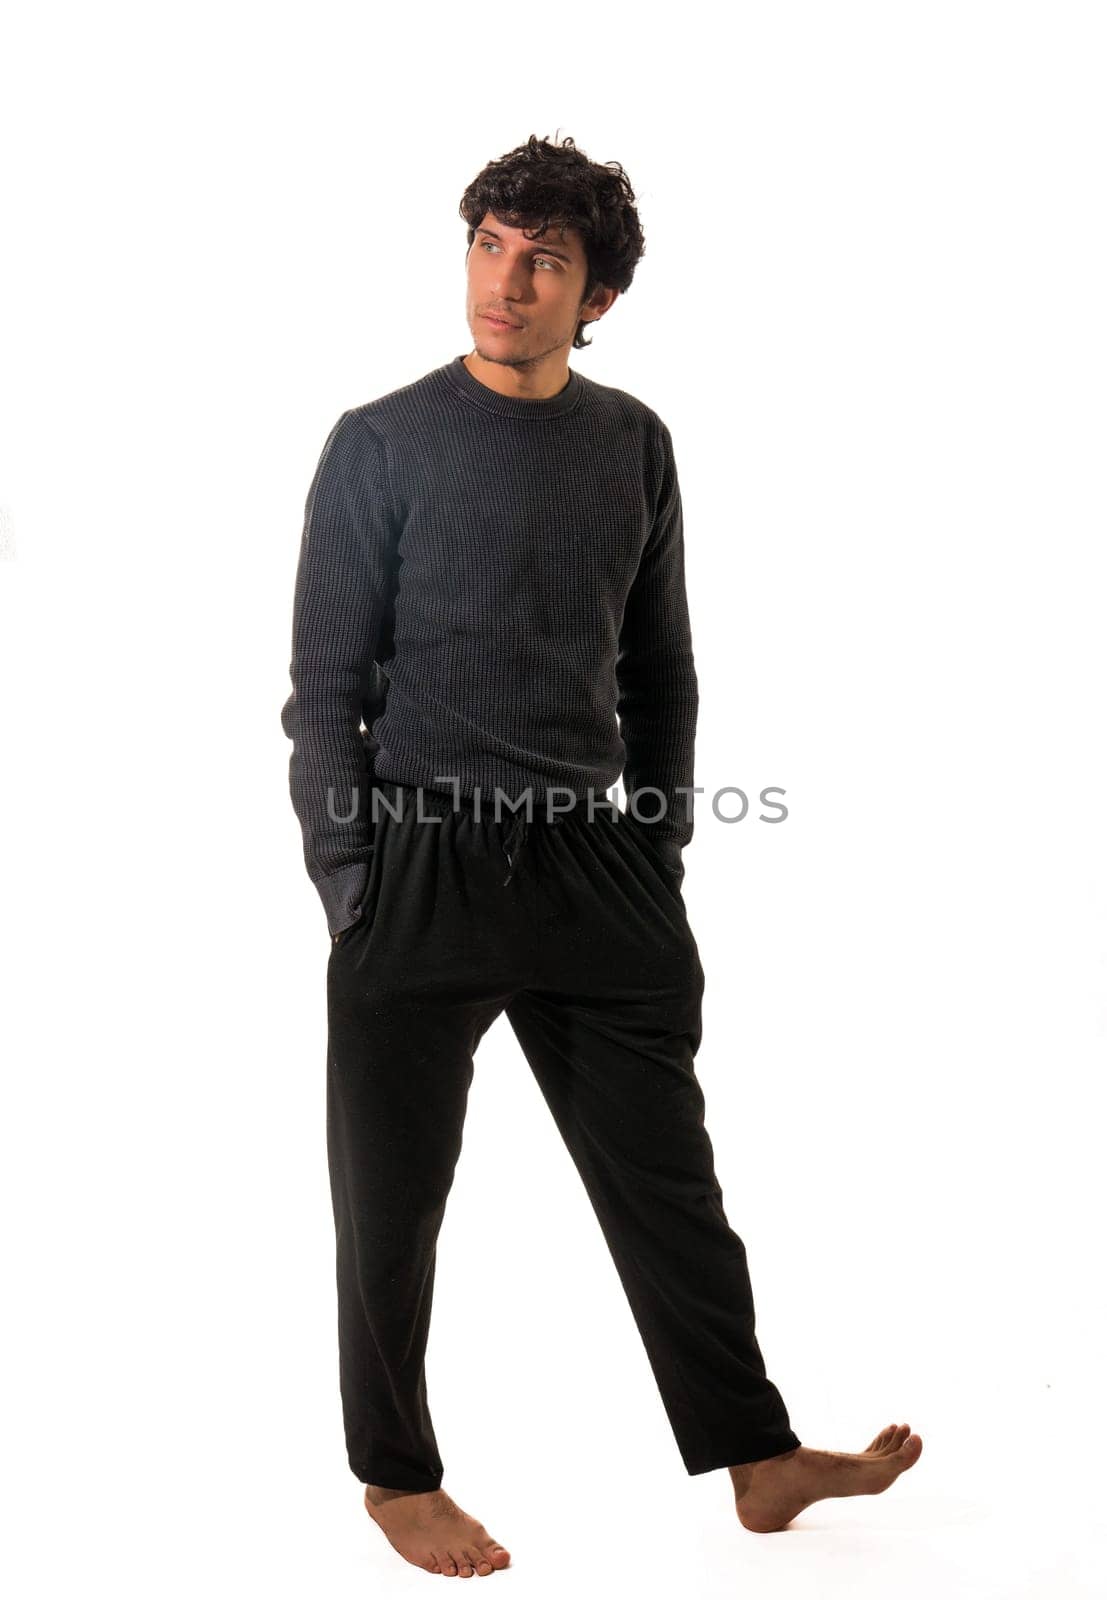 A man in a black sweater and black pants, walking around, with hands in pockets, full figure shot isolated on white